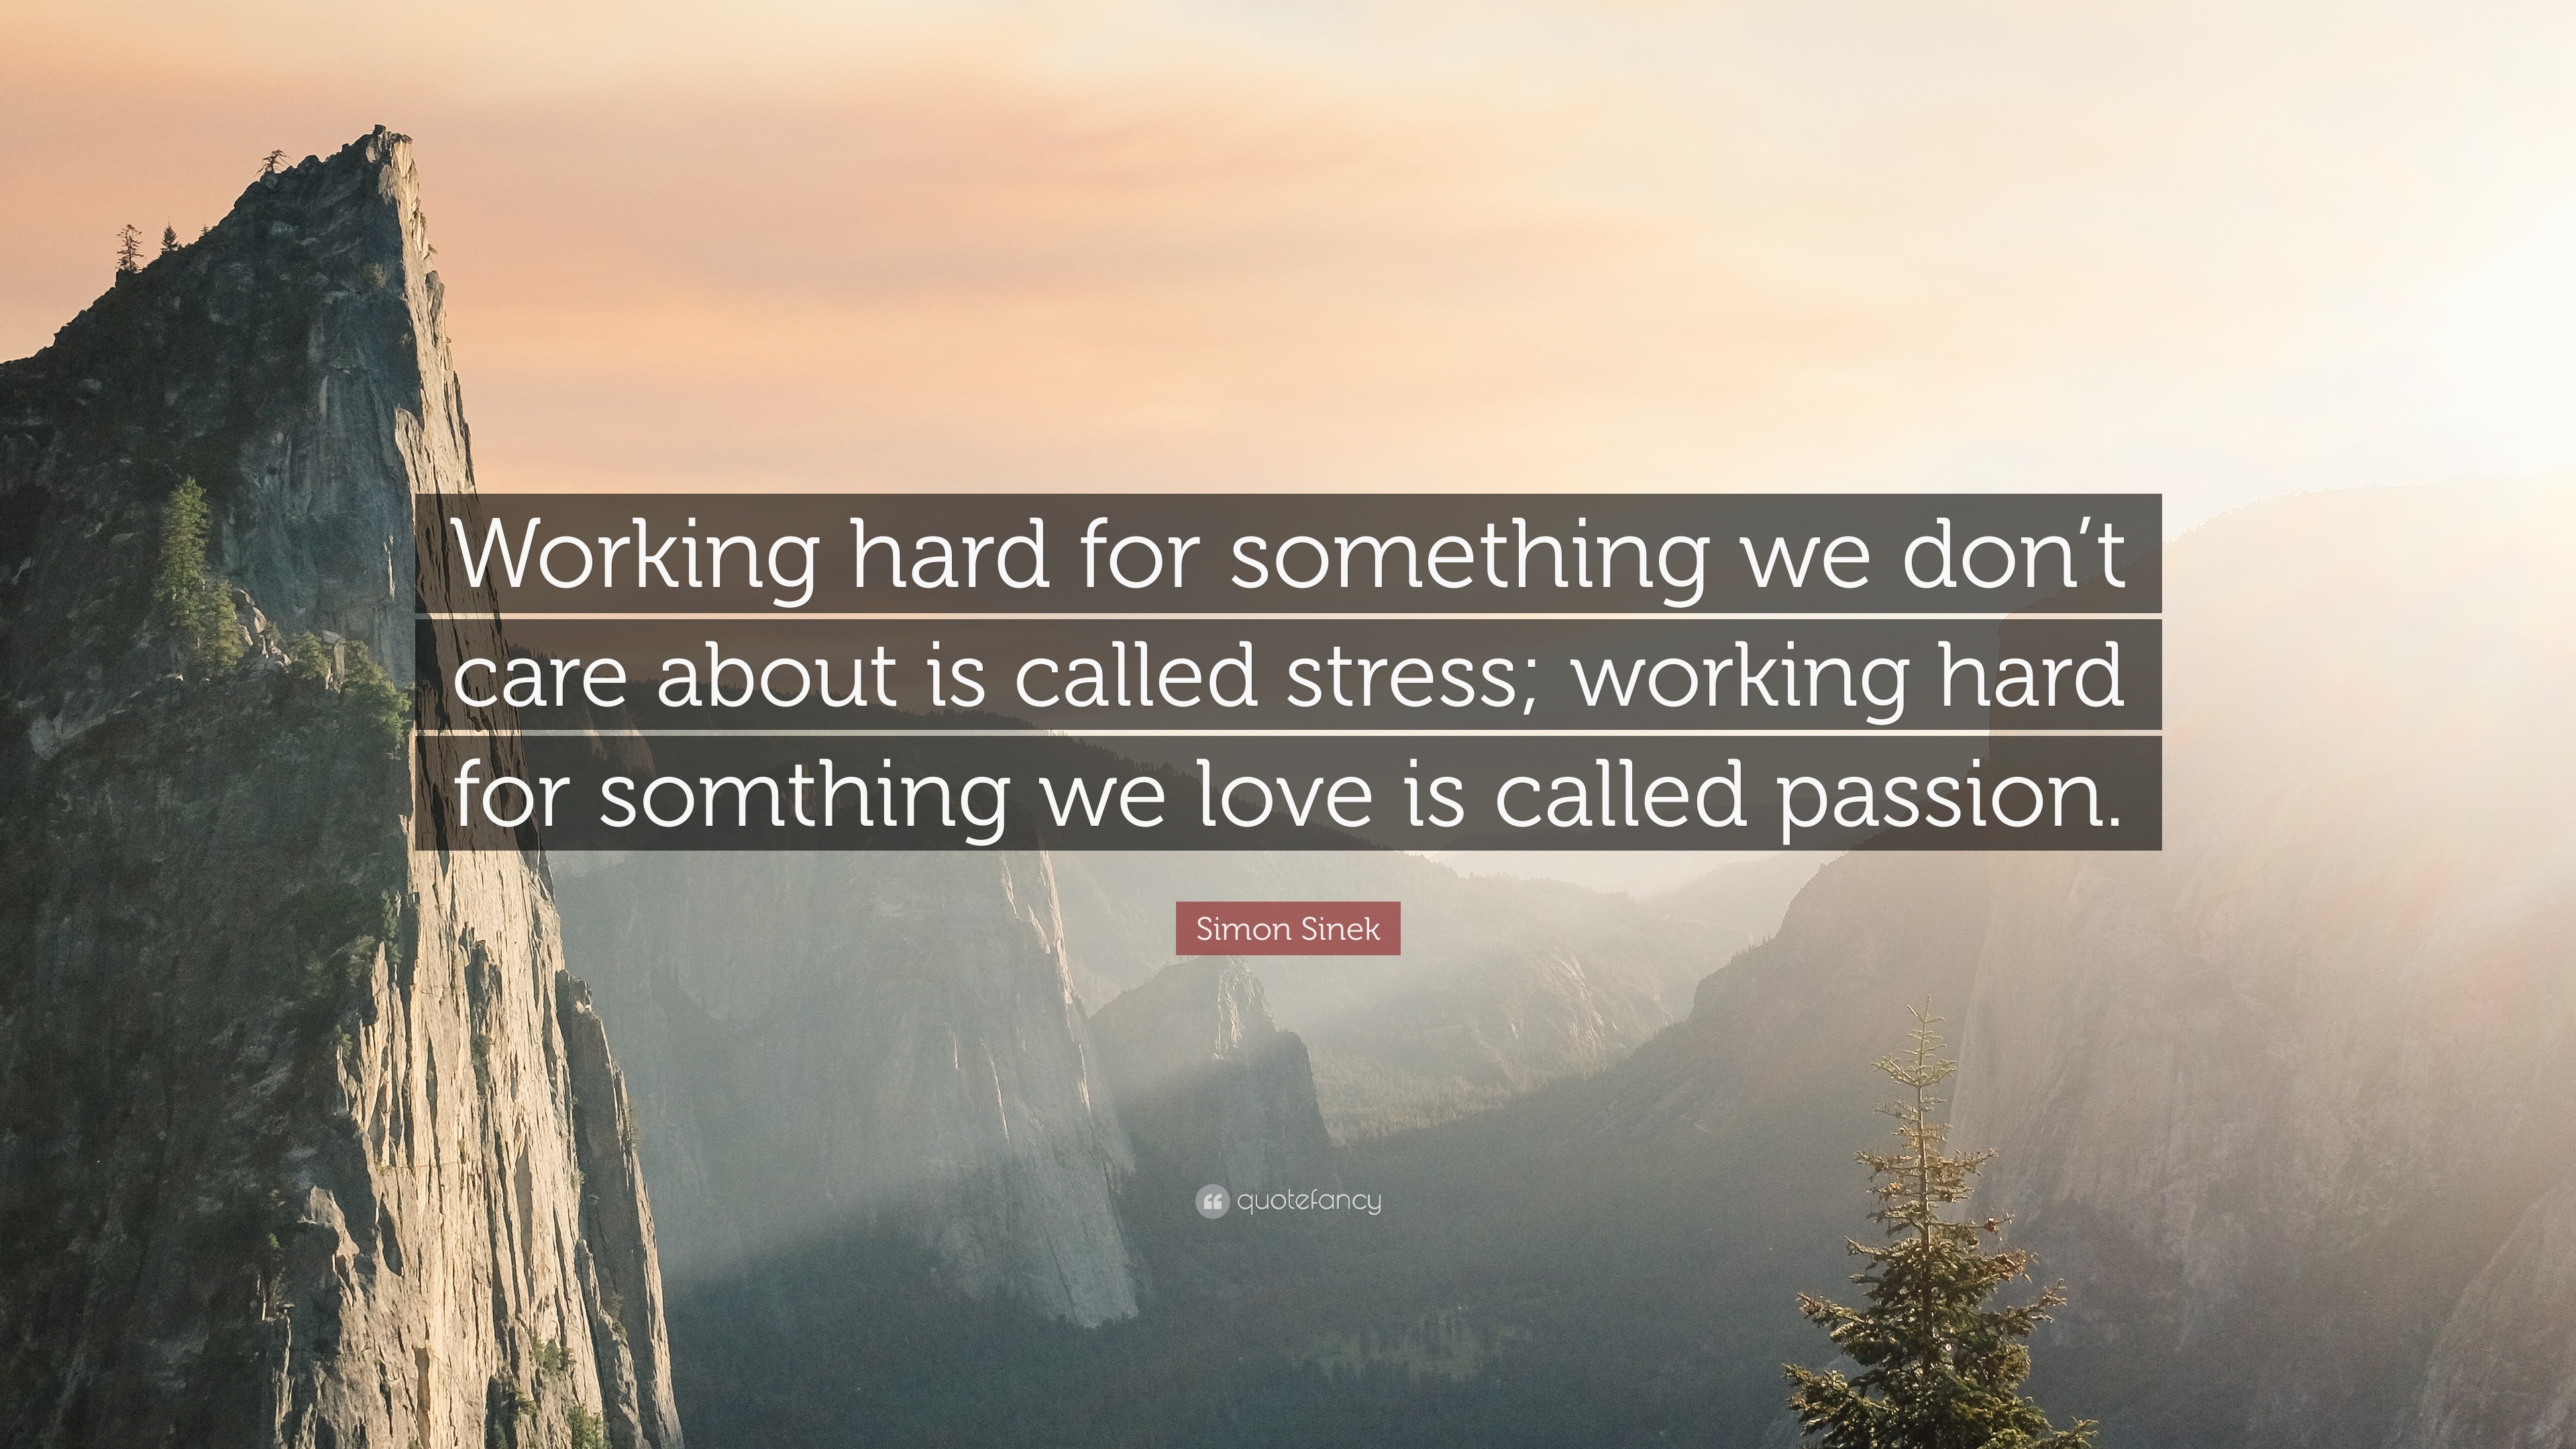 Image result for simon sinek quote working hard for something we care about"